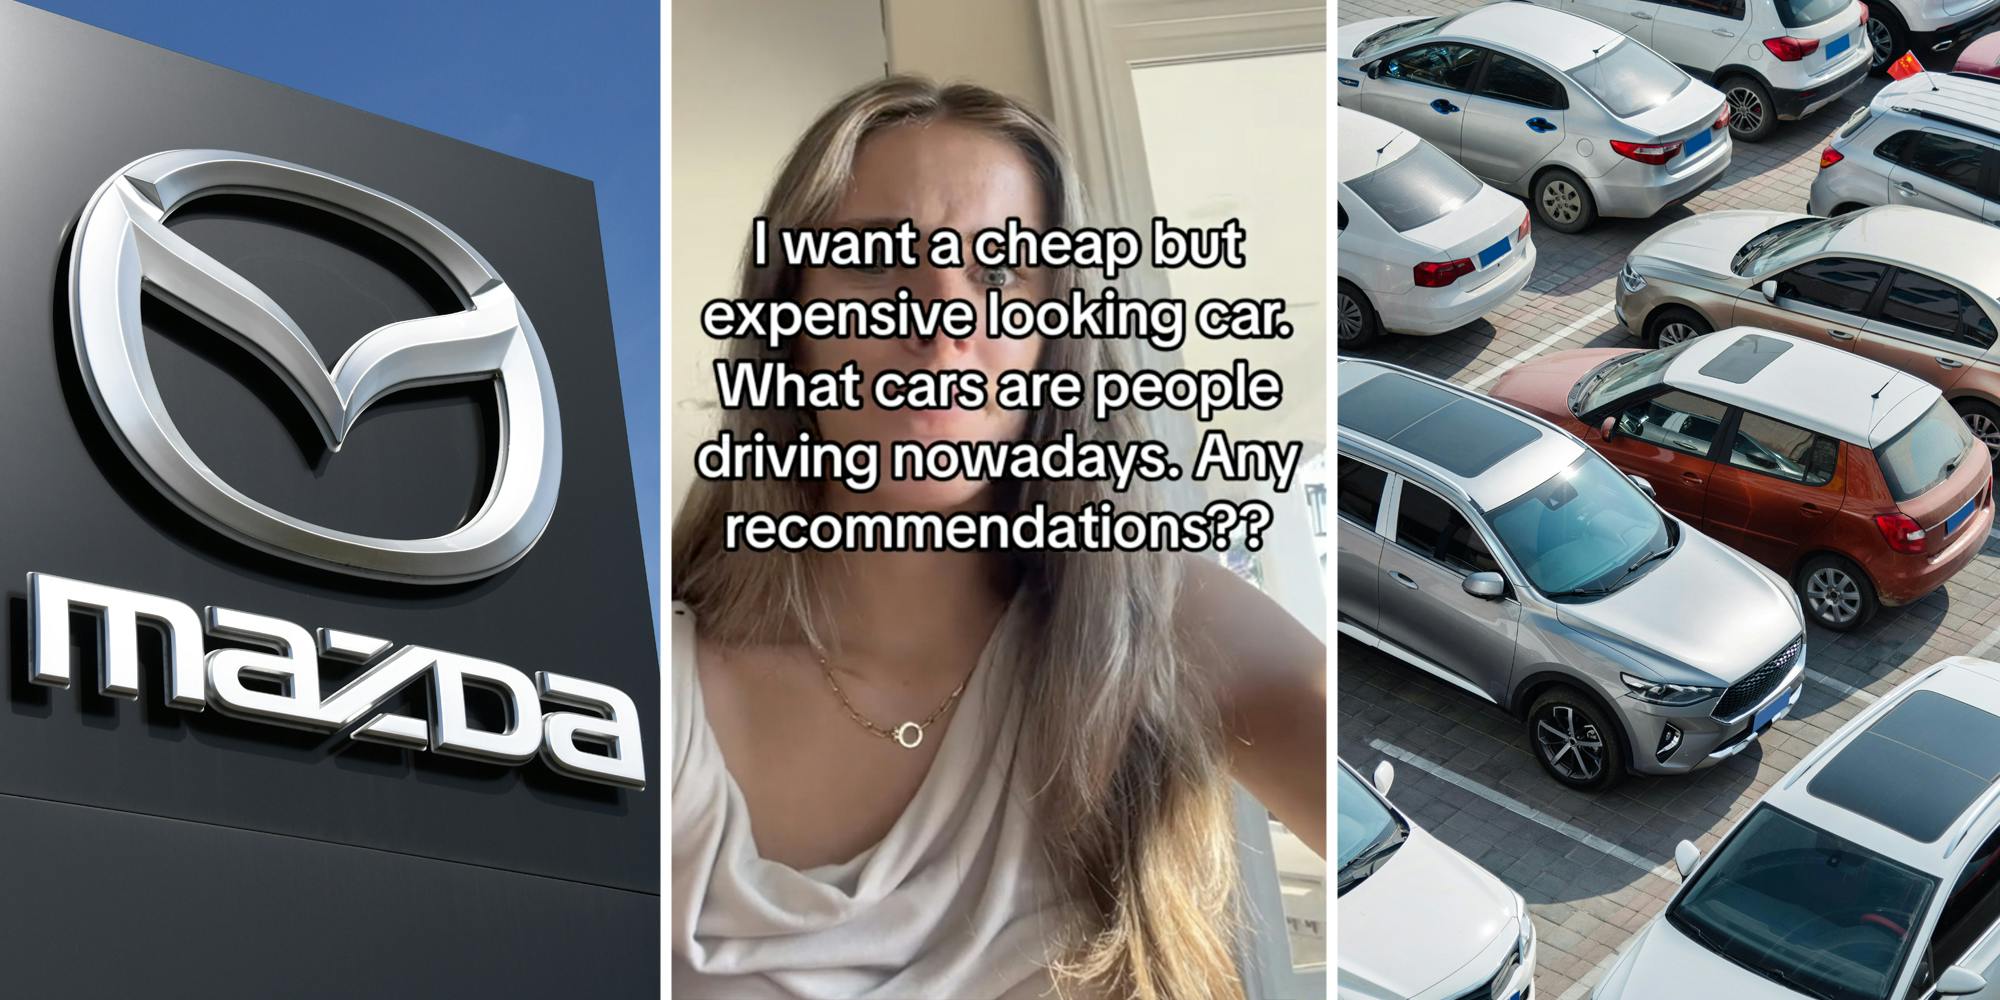 Mazda sign(l), Woman saying "I want a cheap but expensive looking car. What cars are people driving nowadays. Any recommendations??"(c), Cars in lot(r)